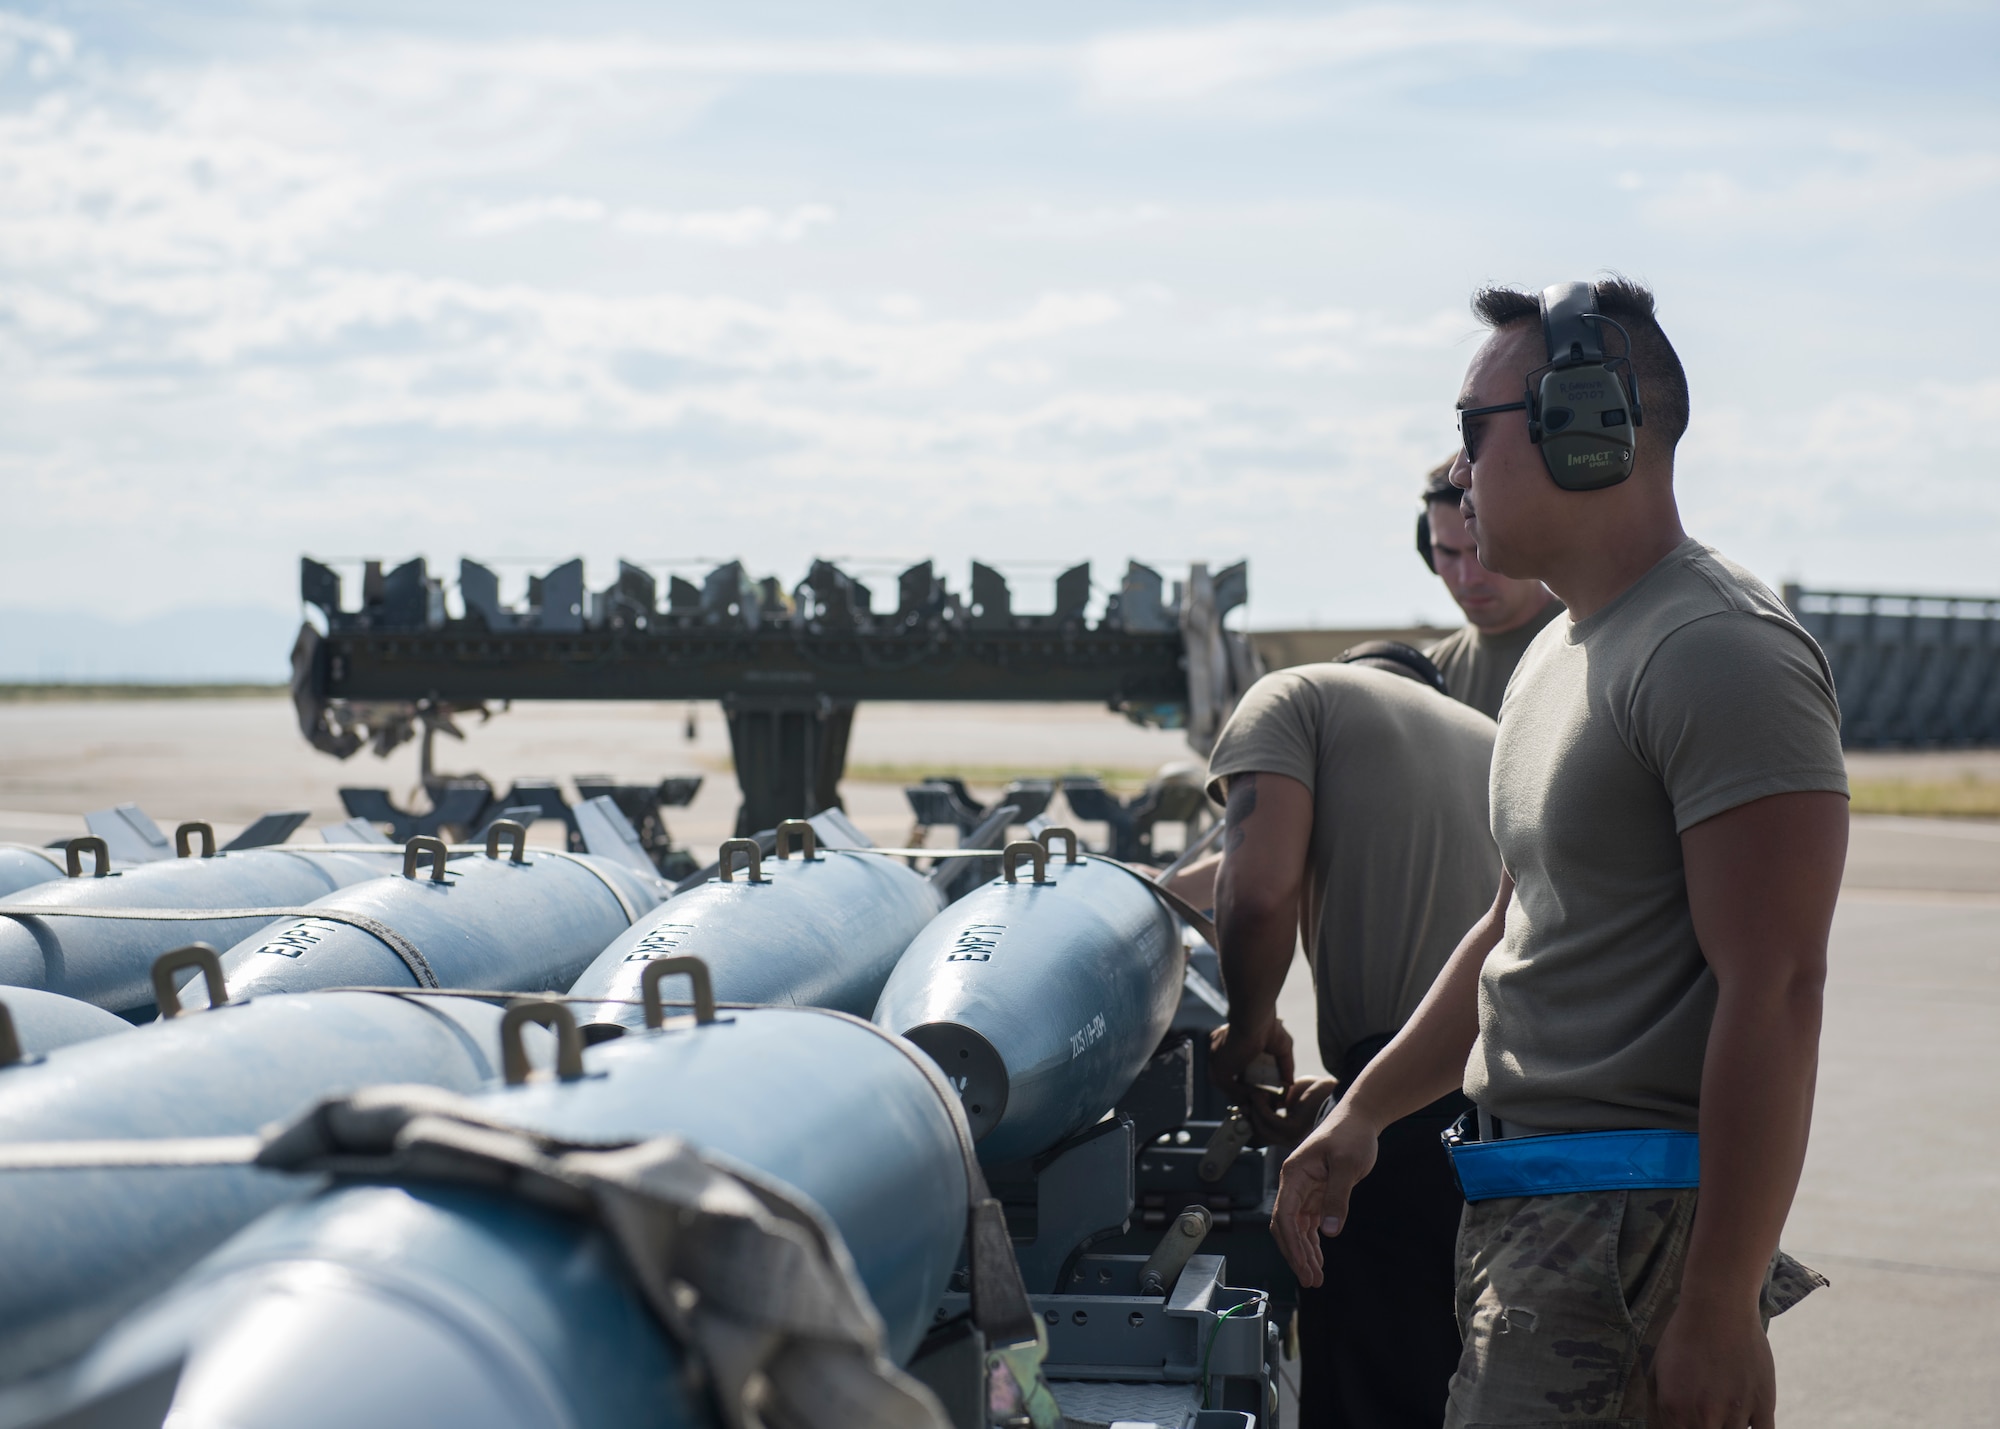 Weapons load crew chiefs from the 391st Fighter squadron prepare to load training eqipment onto an F-15E Strike Eagle during the Adaptive Basing exercise July 17, 2019 at Mountain Home Air Force Base. Weapons load crew chiefs play a vital role in down-range missions, as they are charged with making sure fighter aircraft are re-armed efficiently to continue the fight. (U.S. Air Force photo by Senior Airman Tyrell Hall)